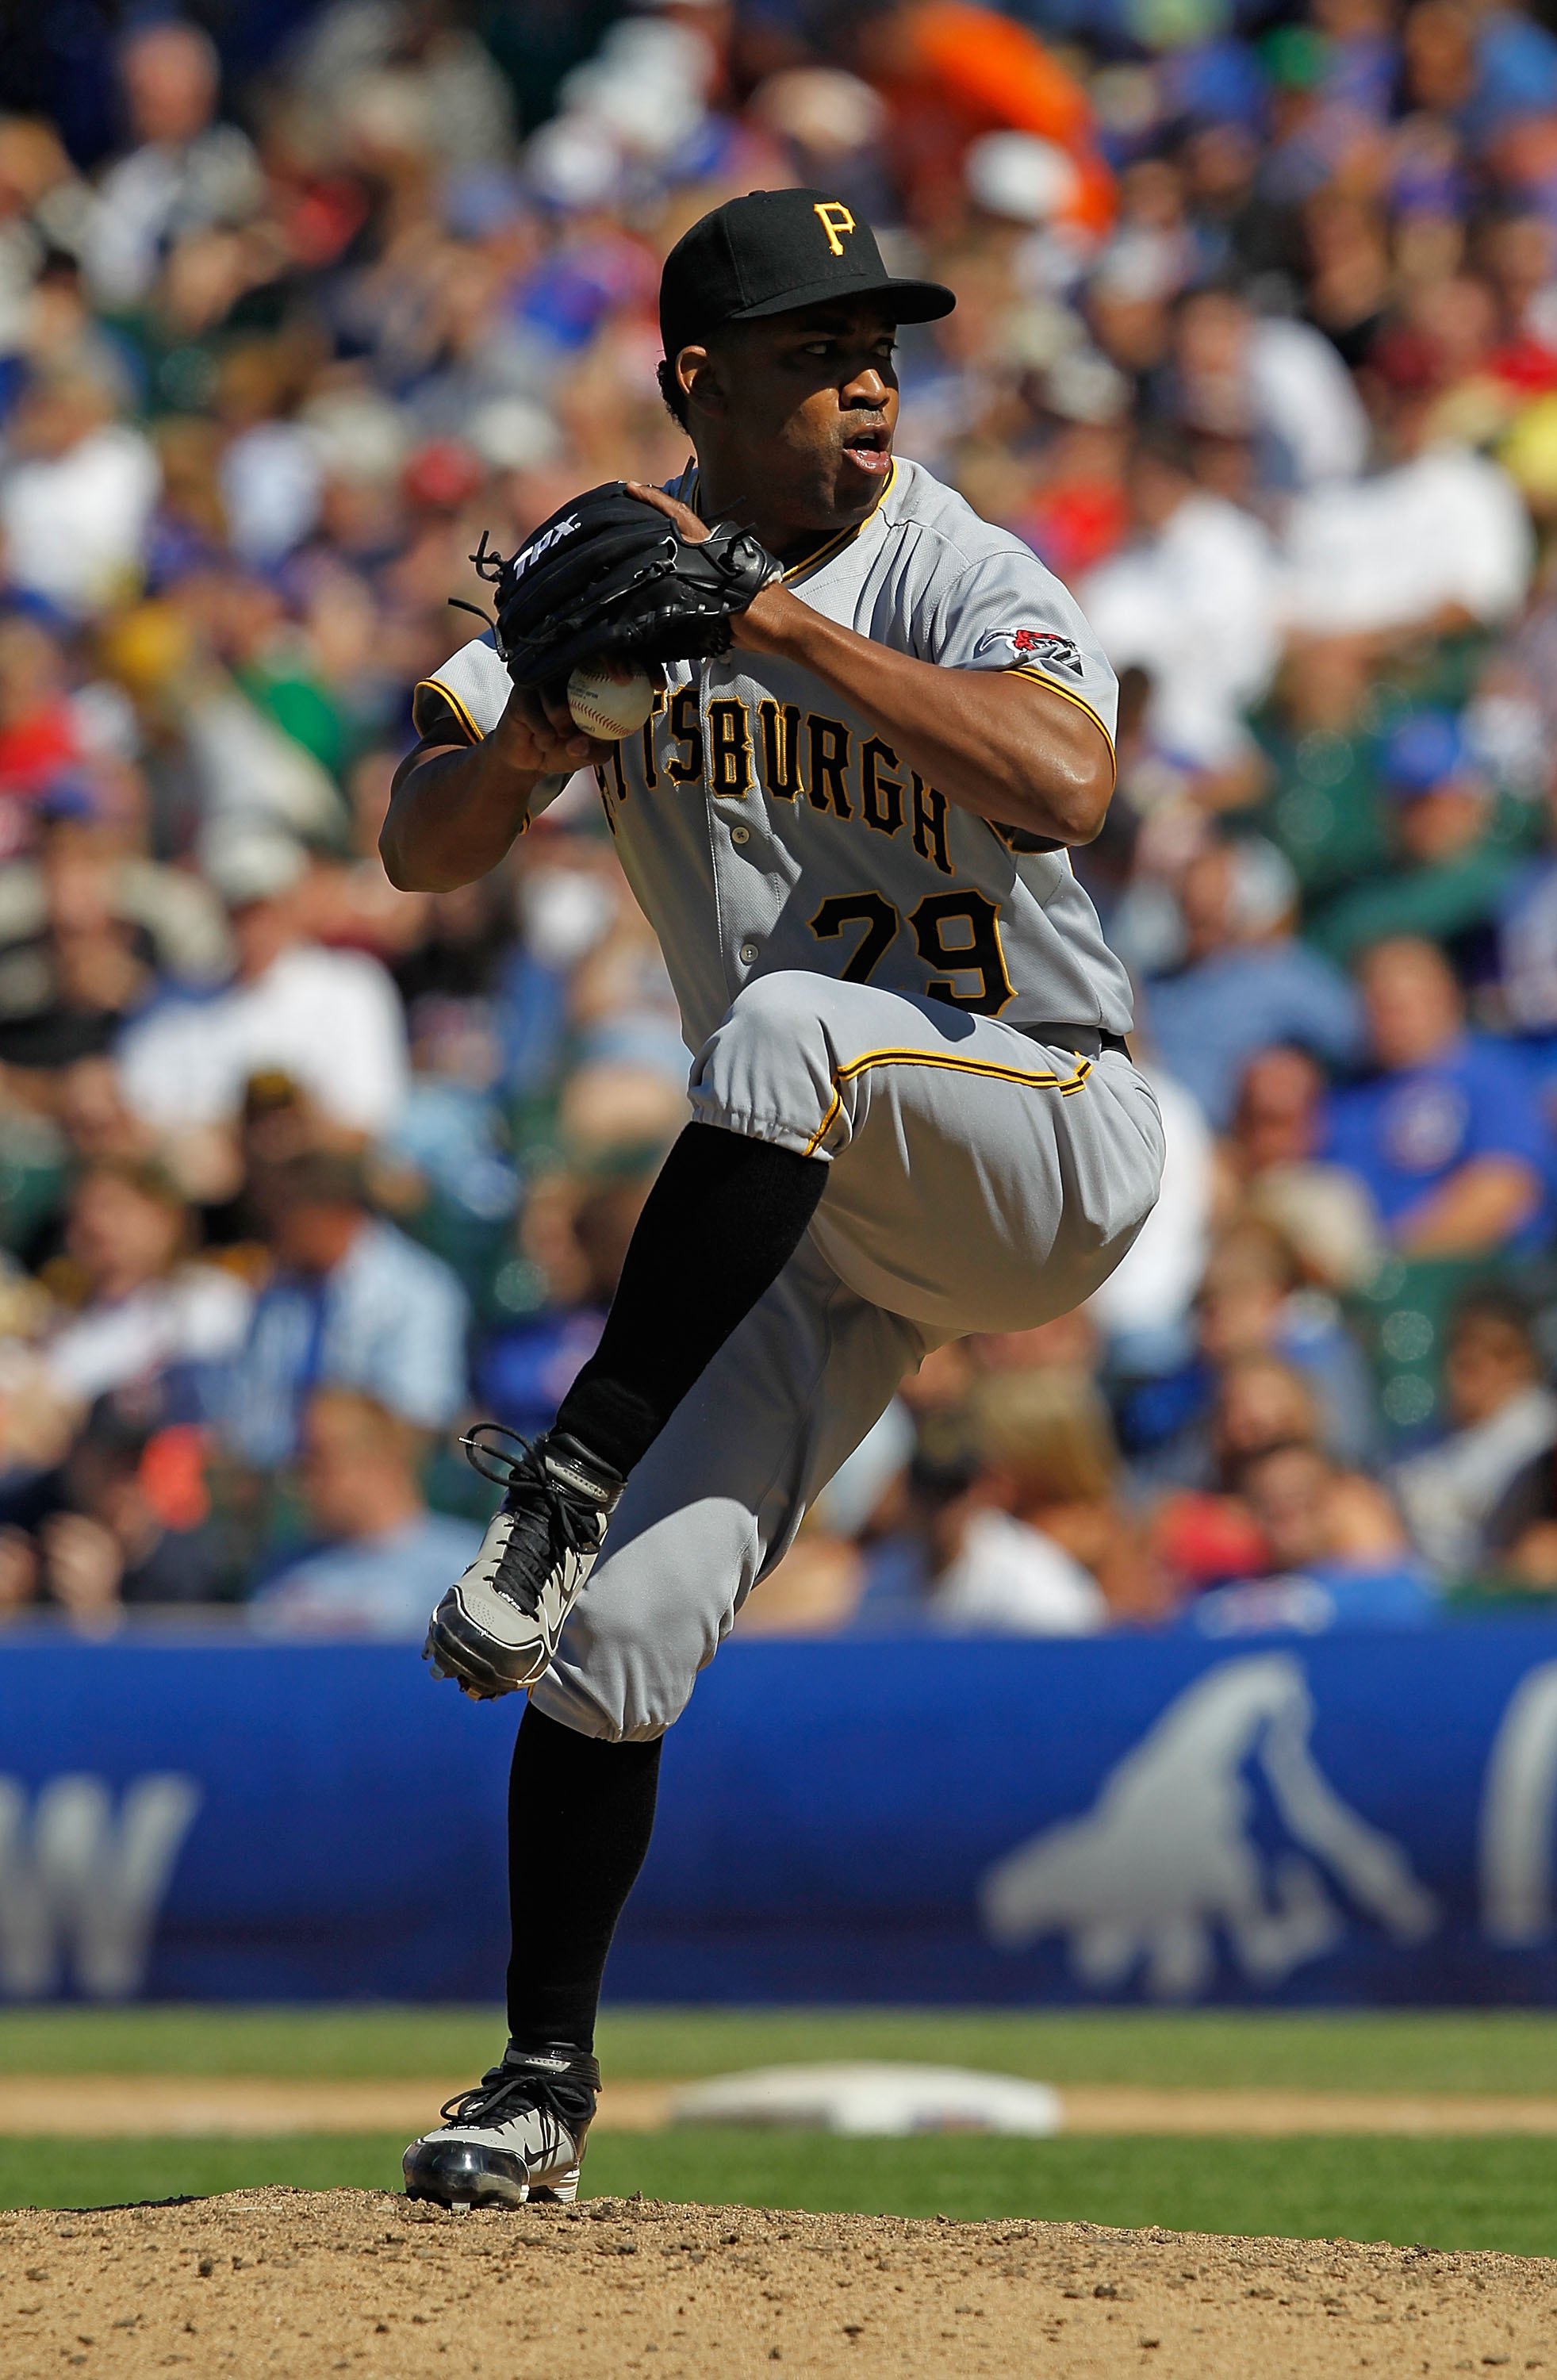 CHICAGO - JUNE 30: Octavio Dotel #29 of the Pittsburgh Pirates pitches in the 9th inning on his way to a save against the Chicago Cubs at Wrigley Field on June 30, 2010 in Chicago, Illinois. The Pirates defeated the Cubs 2-0. (Photo by Jonathan Daniel/Get